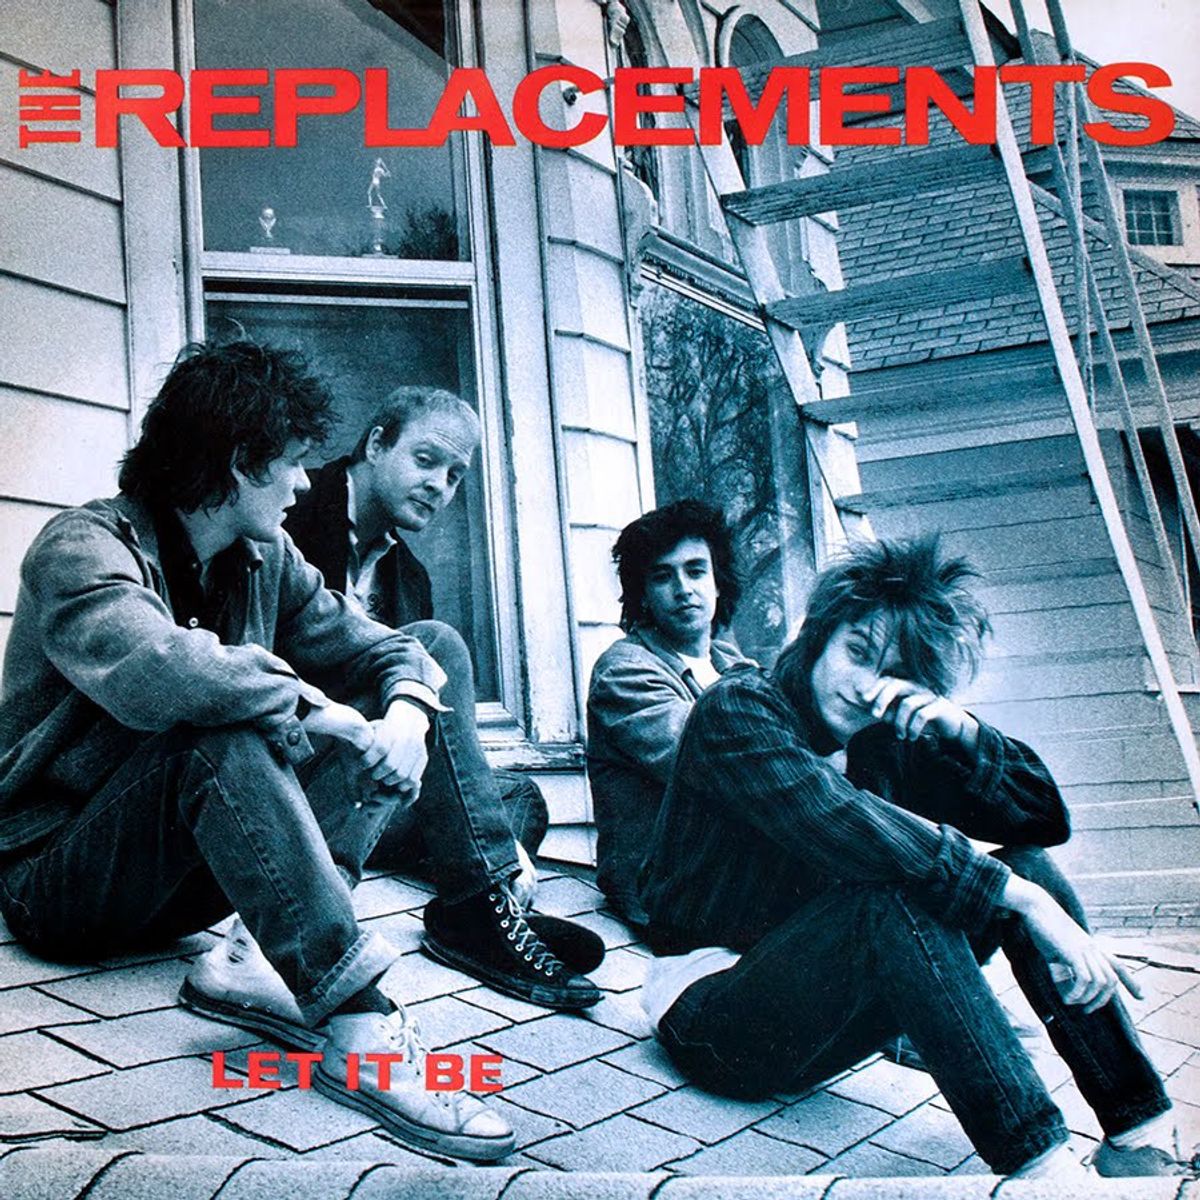 The Replacements' 'Let It Be': A Recollection Of Adolescence